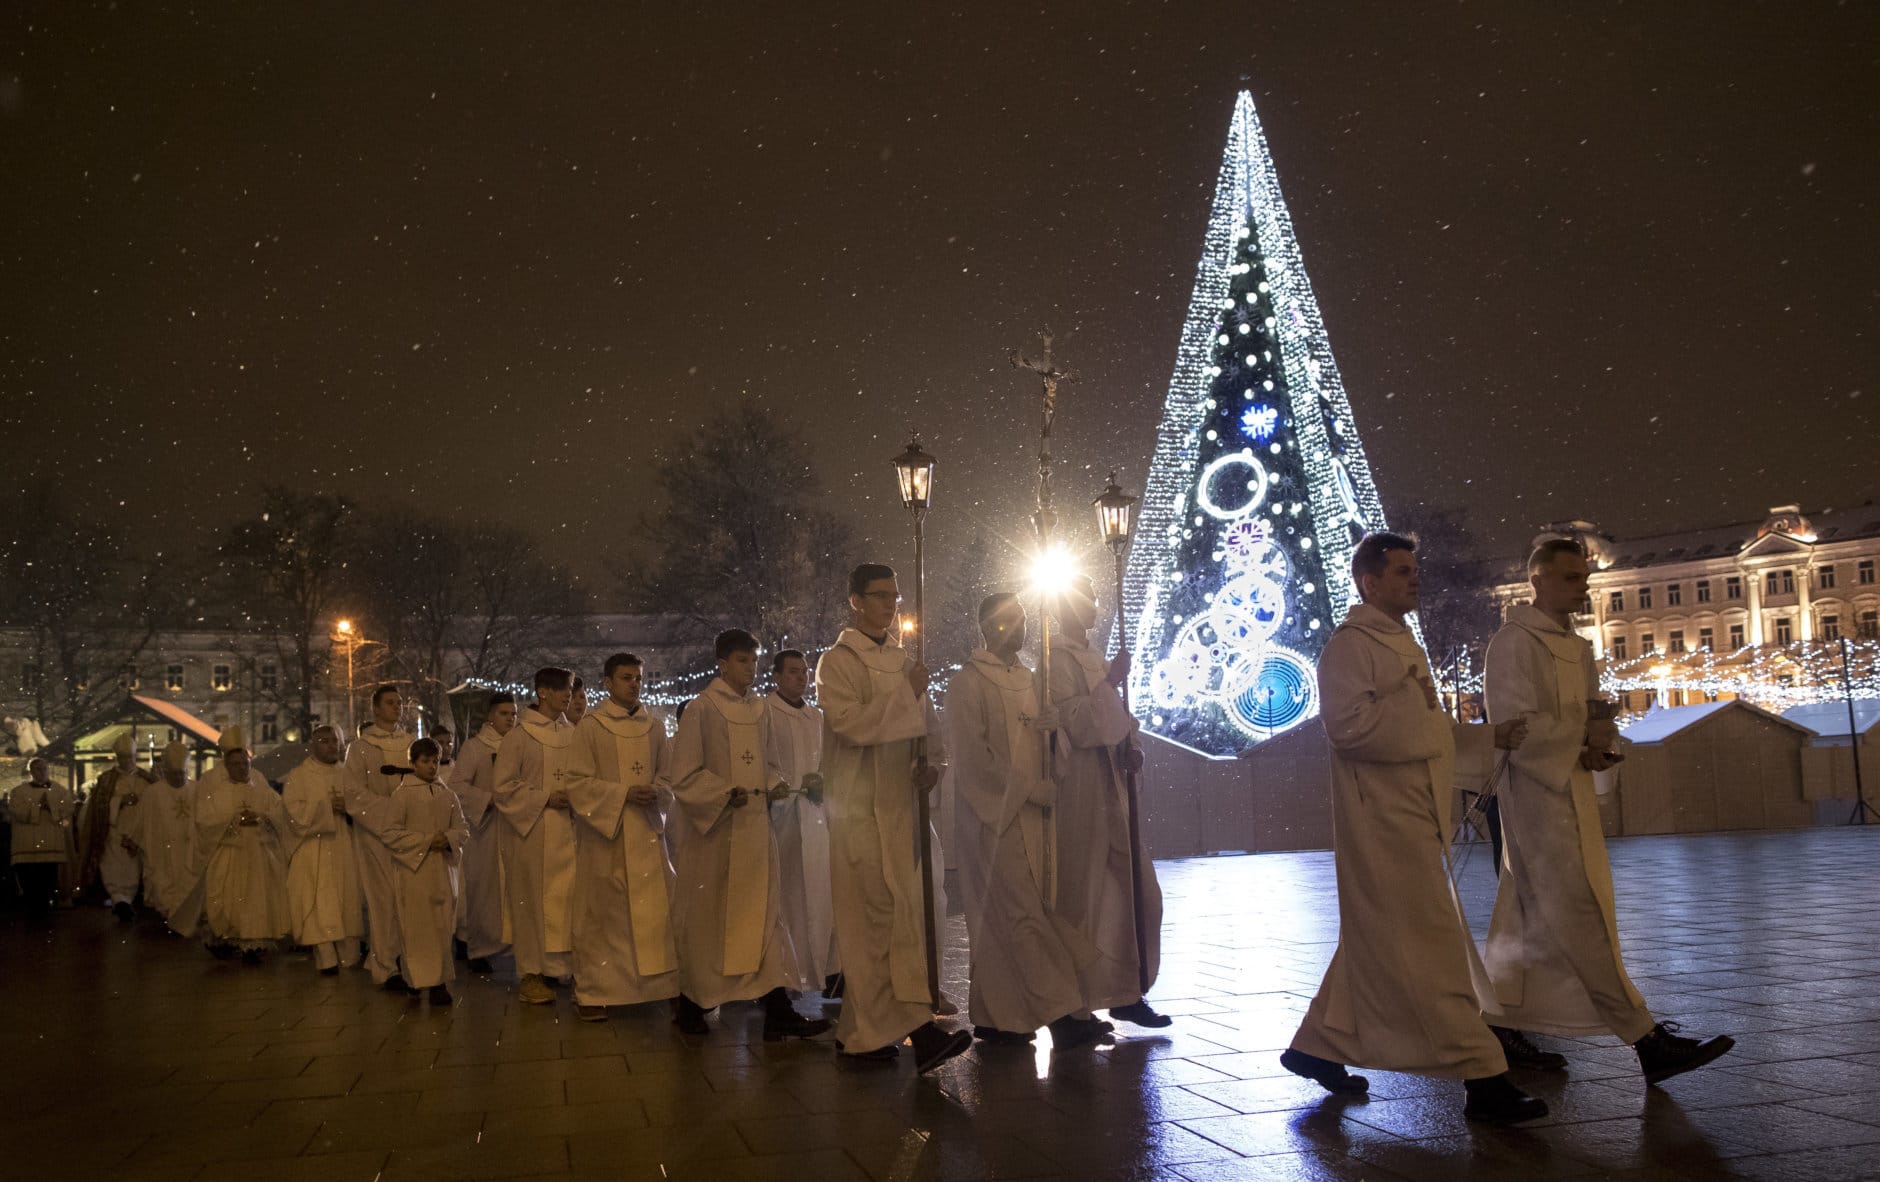 Priests and clergy process to attend the Christmas celebration midnight Mass at the Cathedral-Basilical in Vilnius, Lithuania, Monday, Dec. 24, 2018. Over 80 percent of Lithuanians are Christians who celebrate the festival of Christmas on Dec. 25. (AP Photo/Mindaugas Kulbis)